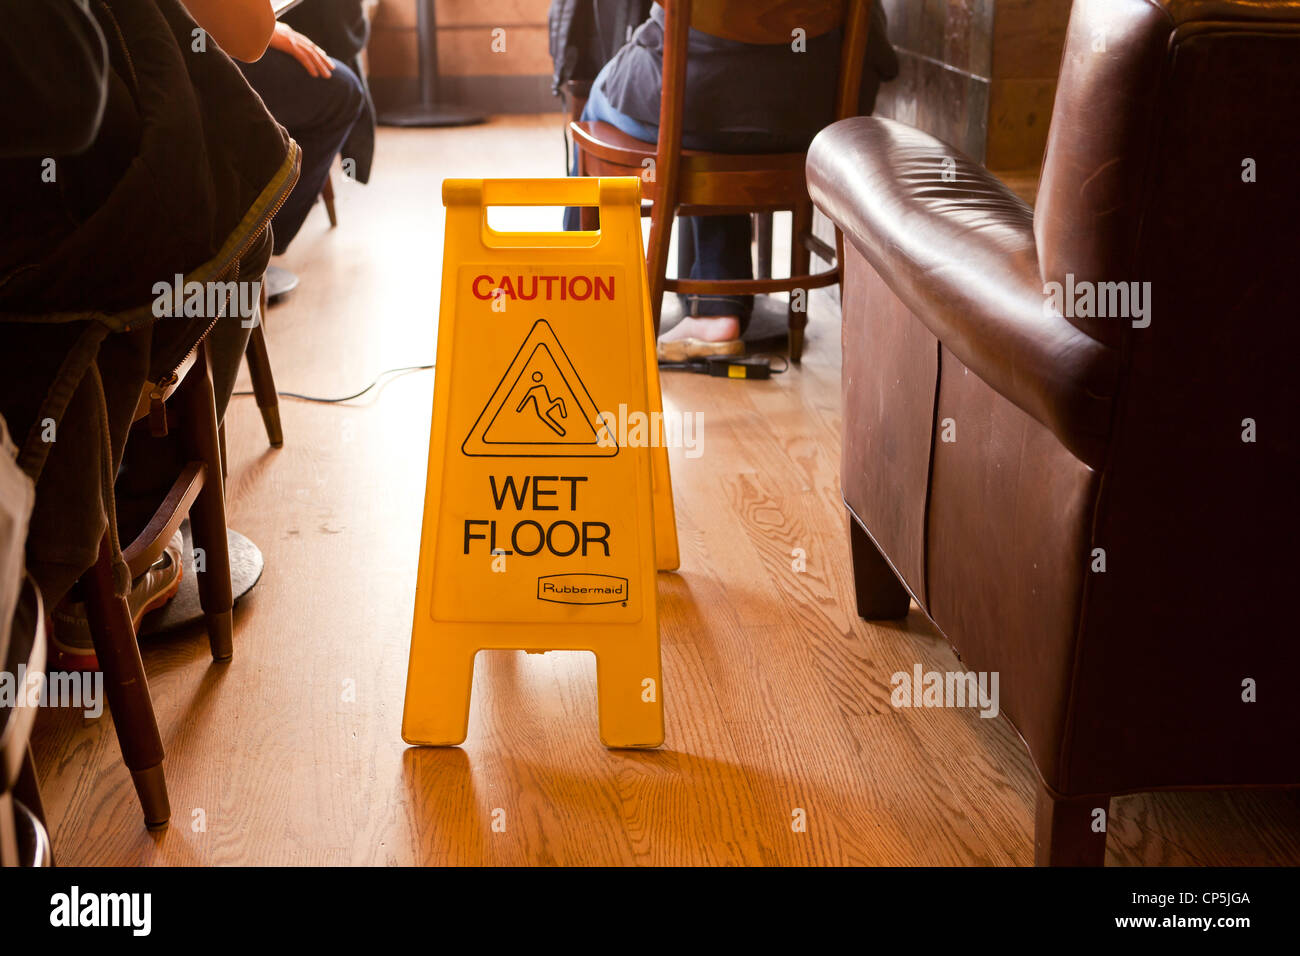 Wet floor safety sign in coffee shop Stock Photo